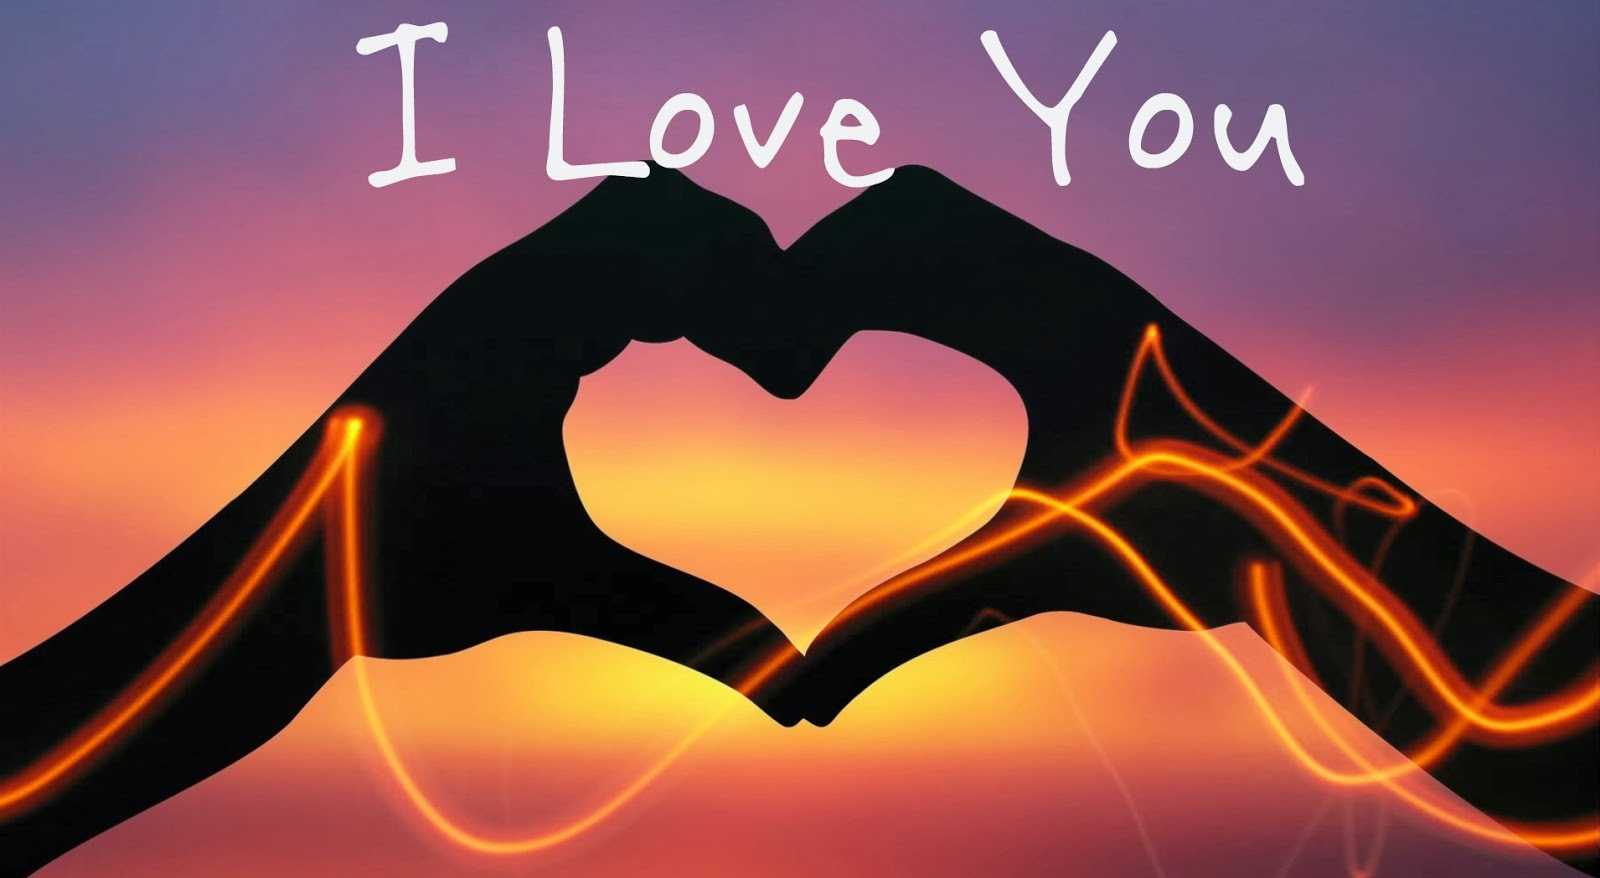 I Love You HD Wallpaper High Resolution Pics Of Mobile Phones